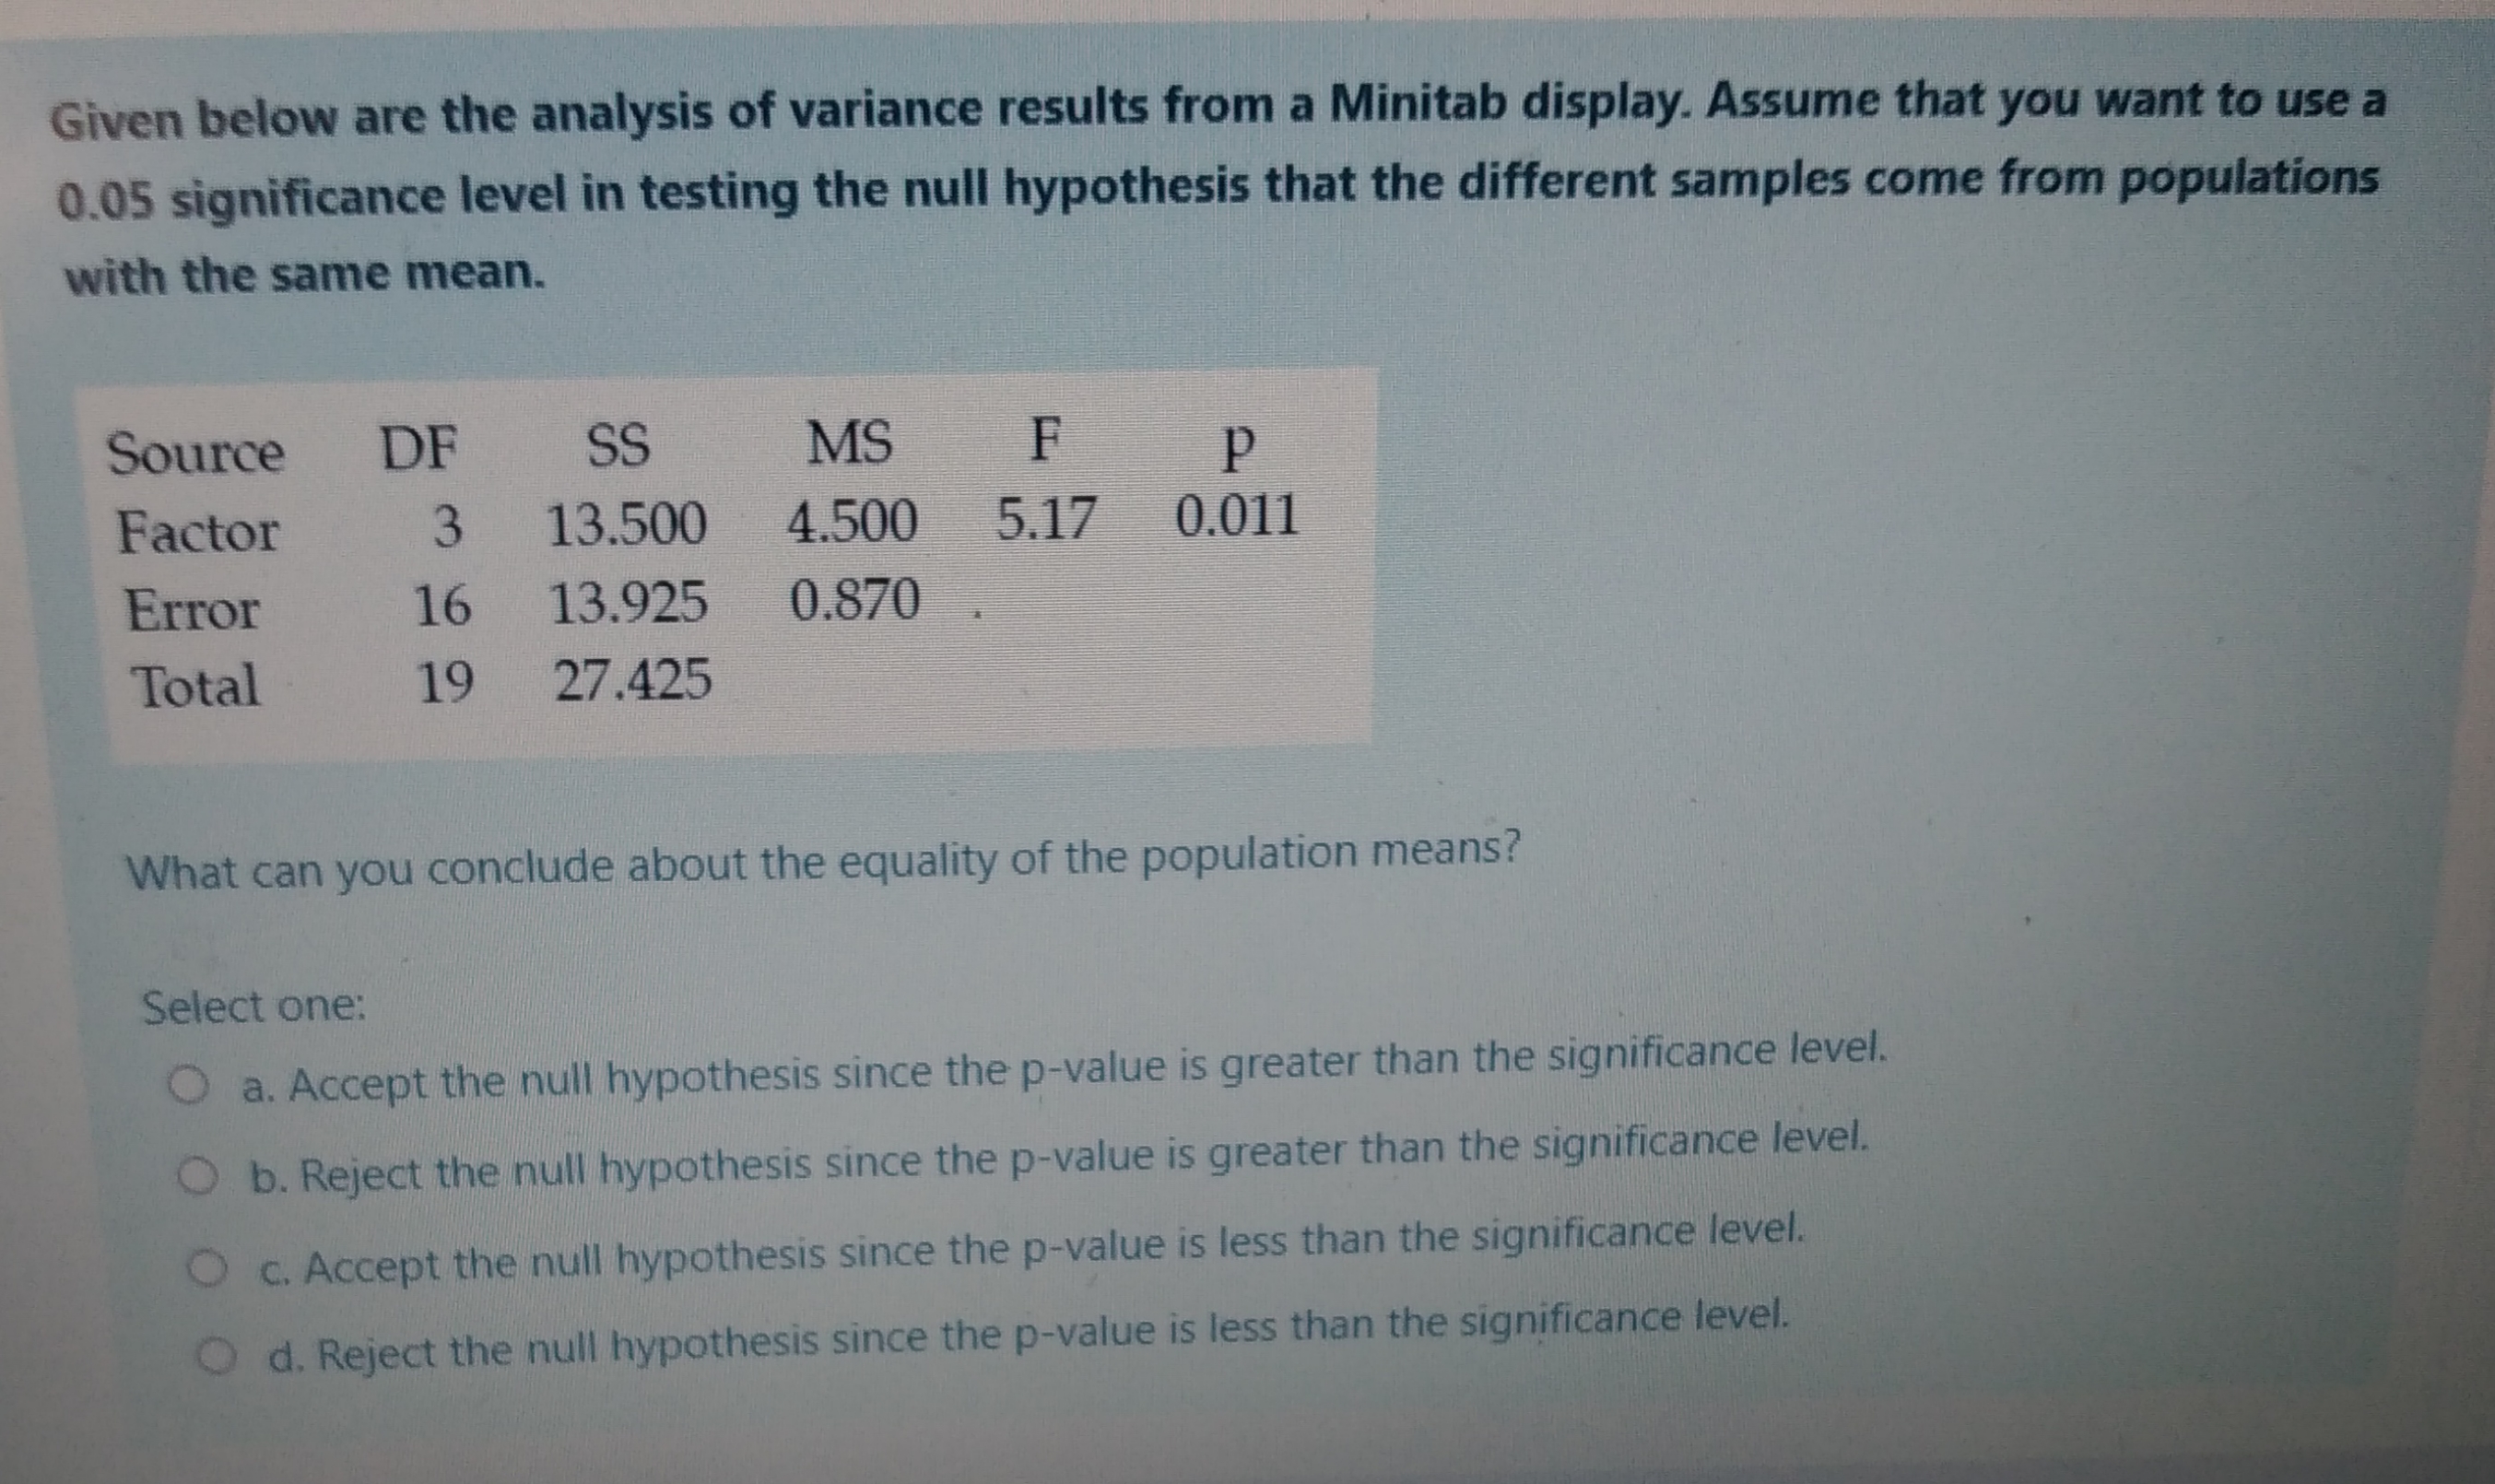 Given below are the analysis of variance results from a Minitab display. Assume that you want to use a
0.05 significance level in testing the null hypothesis that the different samples come from populations
with the same mean.
Source
DF
SS
MS
Factor
3 13.500
4.500
5.17
0.011
Error
16
13.925
0.870
Total
19
27.425
What can you conclude about the equality of the population means?
Select one:
a. Accept the null hypothesis since the p-value is greater than the significance level.
O b. Reject the null hypothesis since the p-value is greater than the significance level.
C. Accept the null hypothesis since the p-value is less than the significance level.
d. Reject the null hypothesis since the p-value is less than the significance level.
